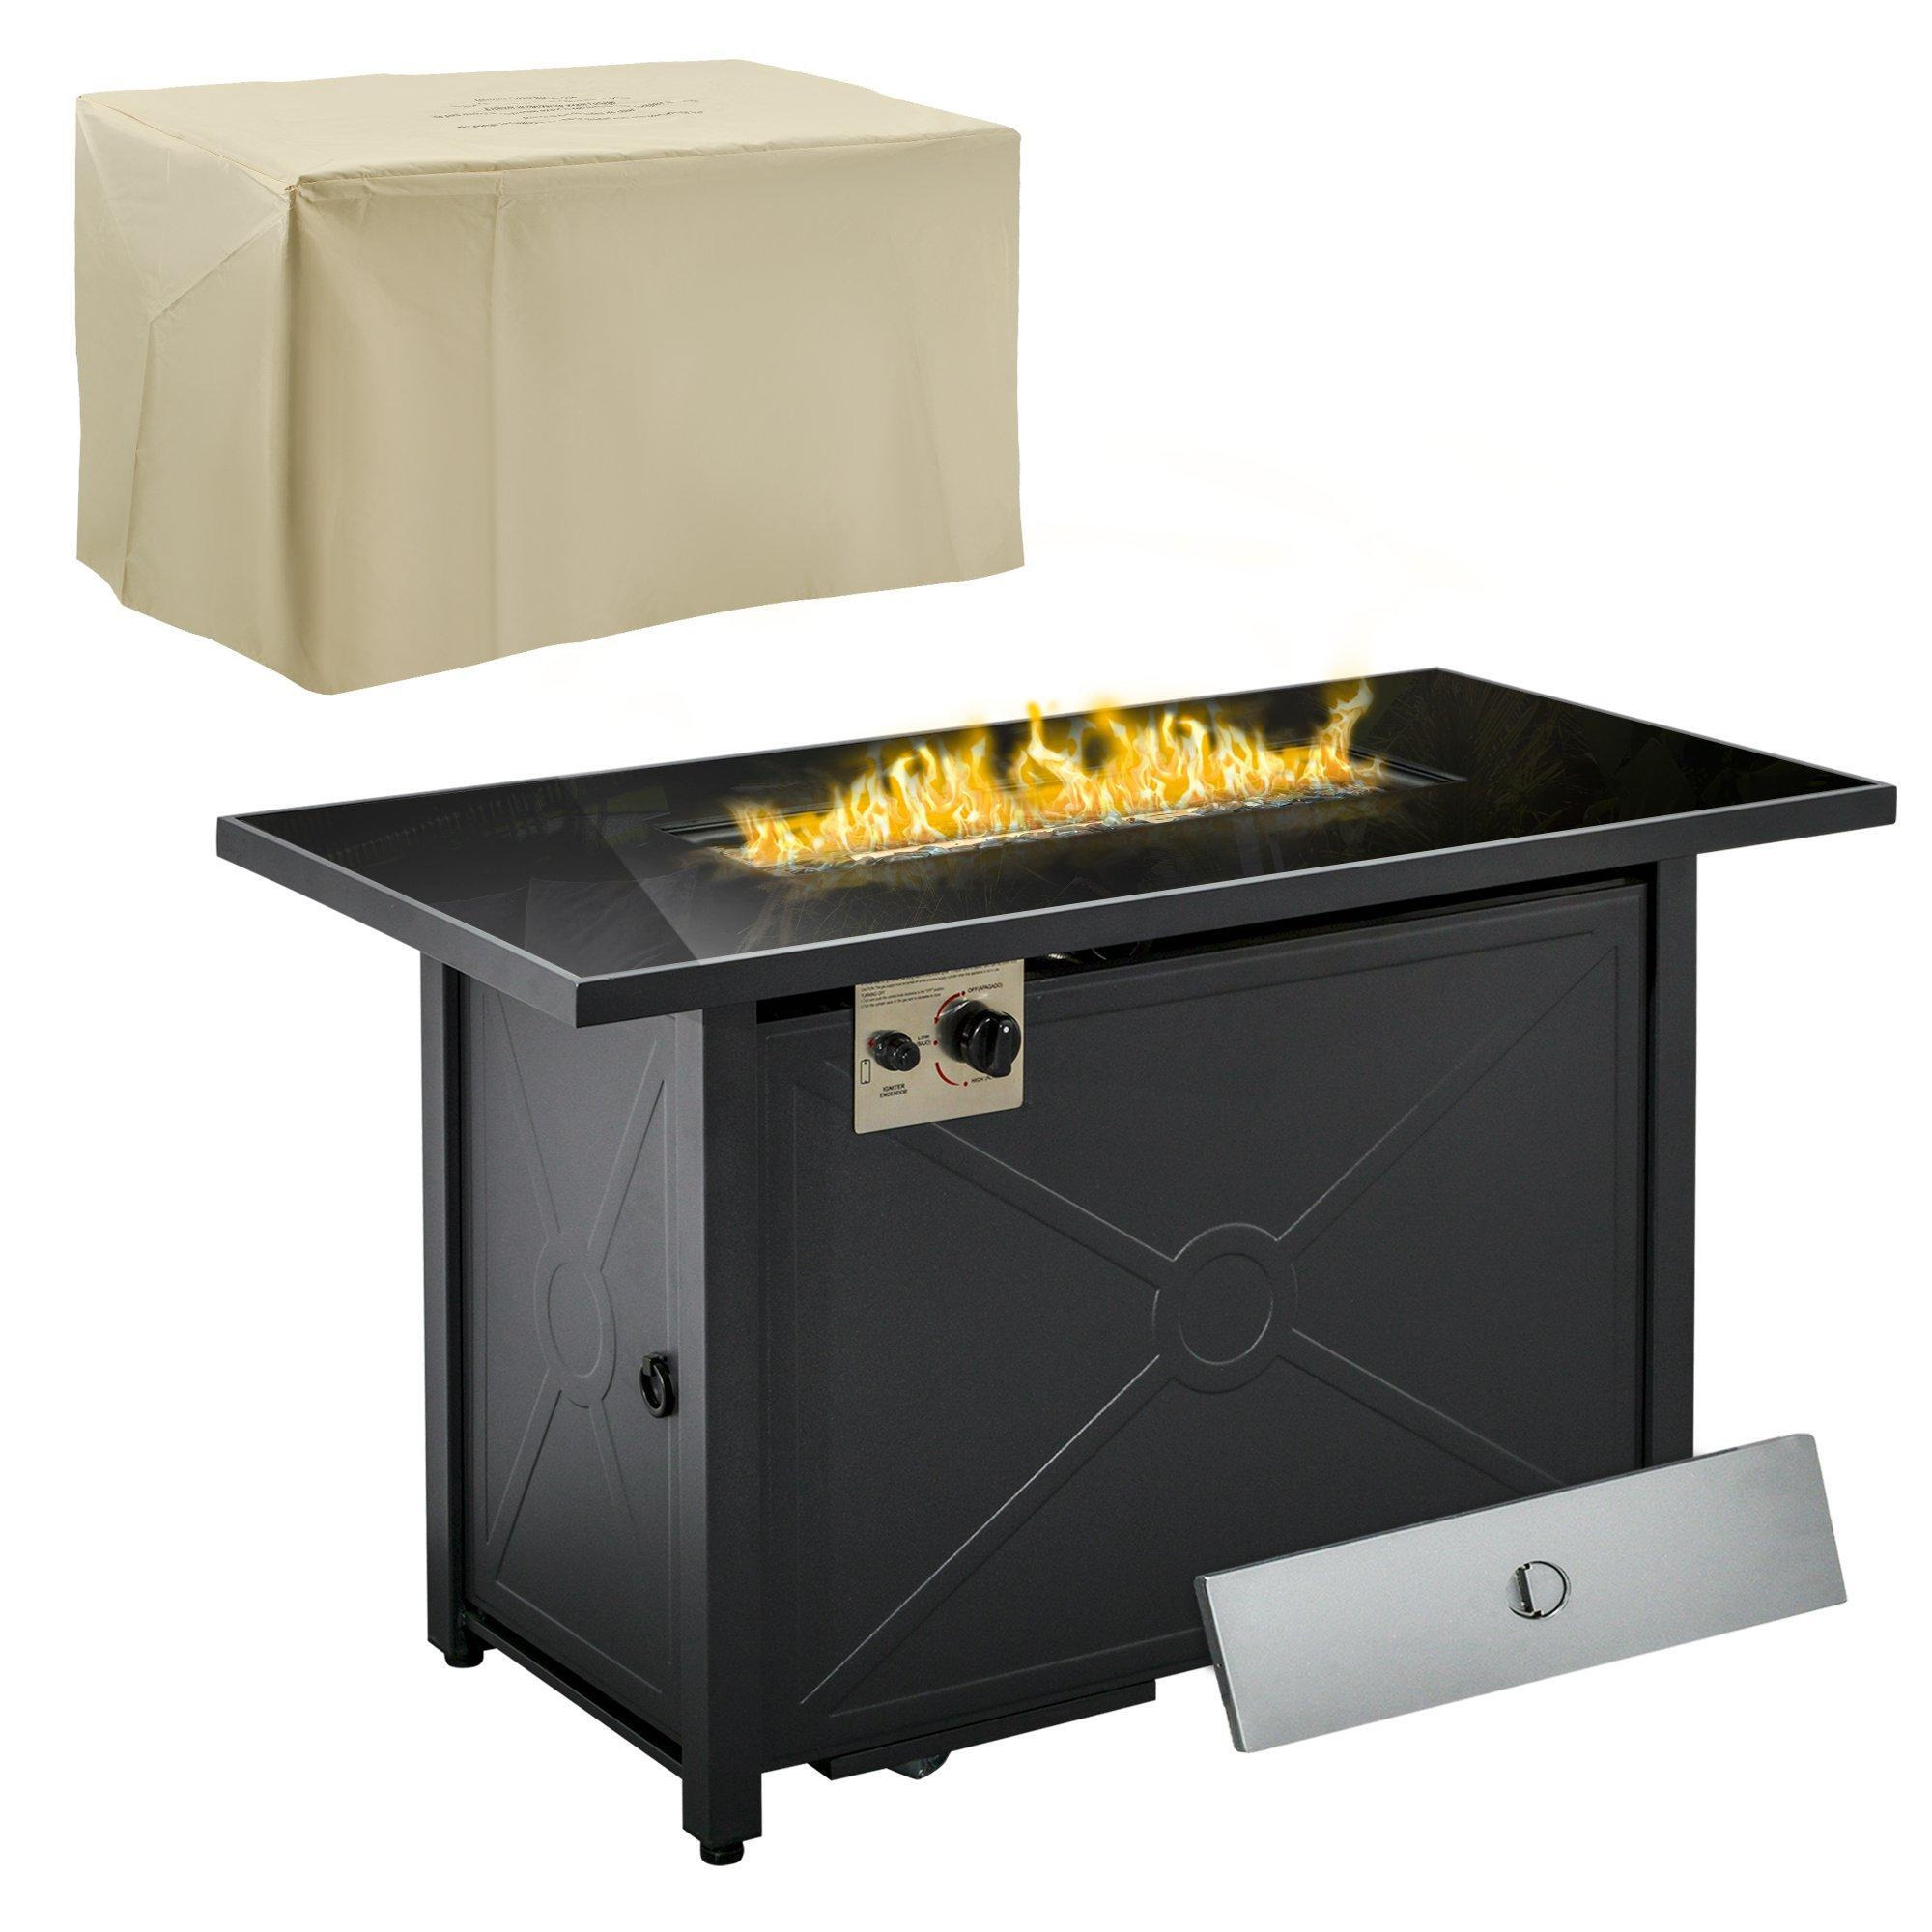 Outdoor Propane Gas Fire Pit Table w/ Rain Cover, 50000 BTU - image 1